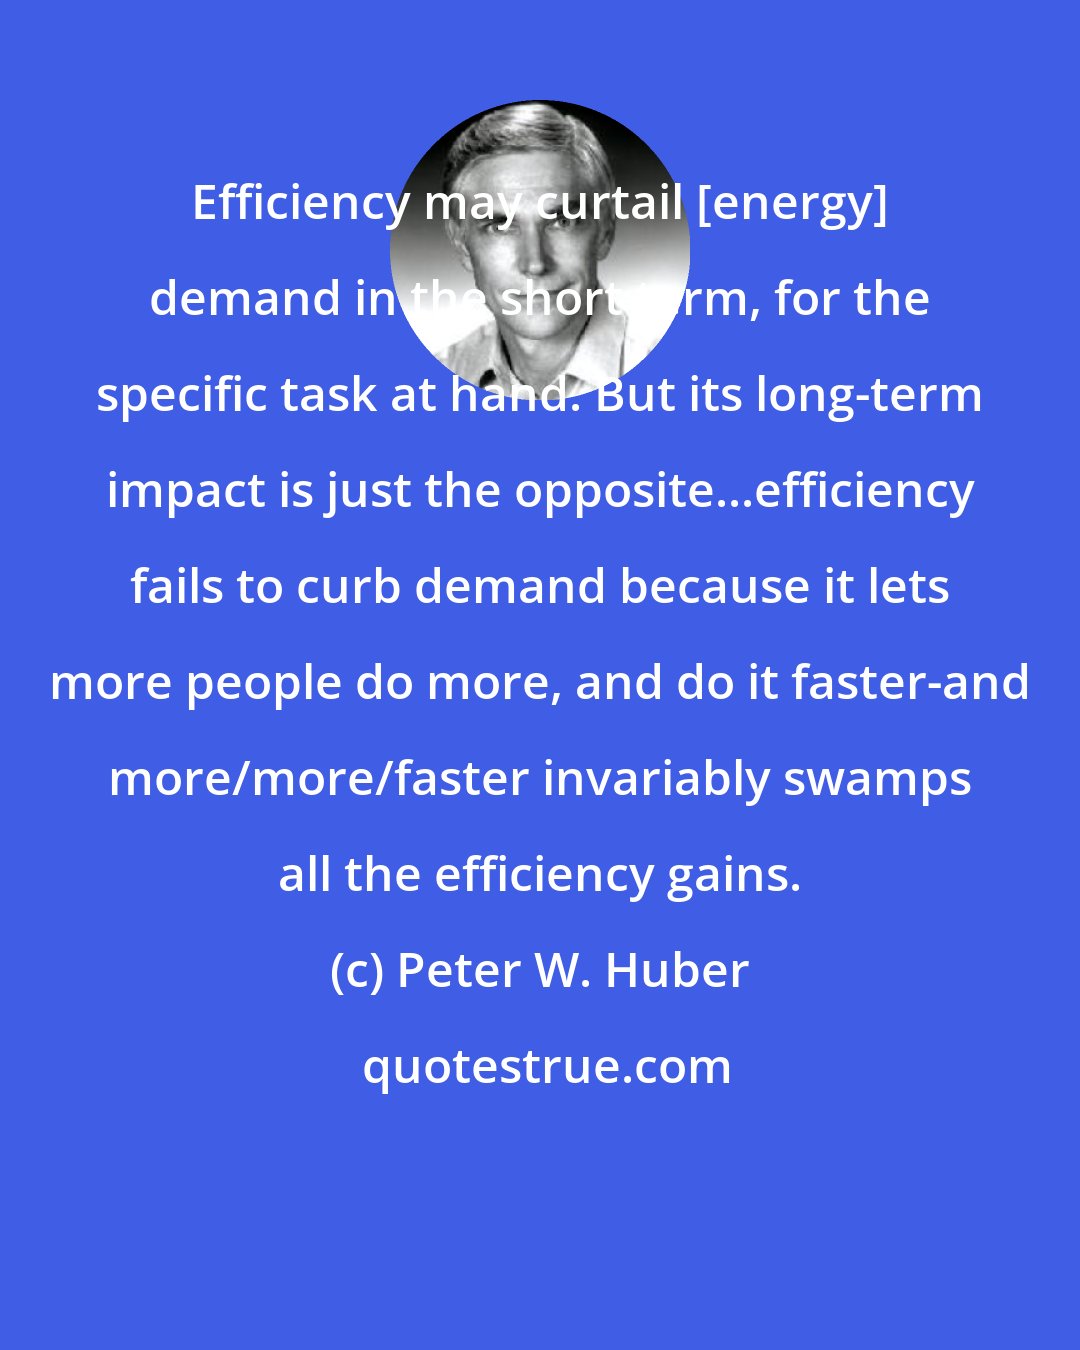 Peter W. Huber: Efficiency may curtail [energy] demand in the short term, for the specific task at hand. But its long-term impact is just the opposite...efficiency fails to curb demand because it lets more people do more, and do it faster-and more/more/faster invariably swamps all the efficiency gains.